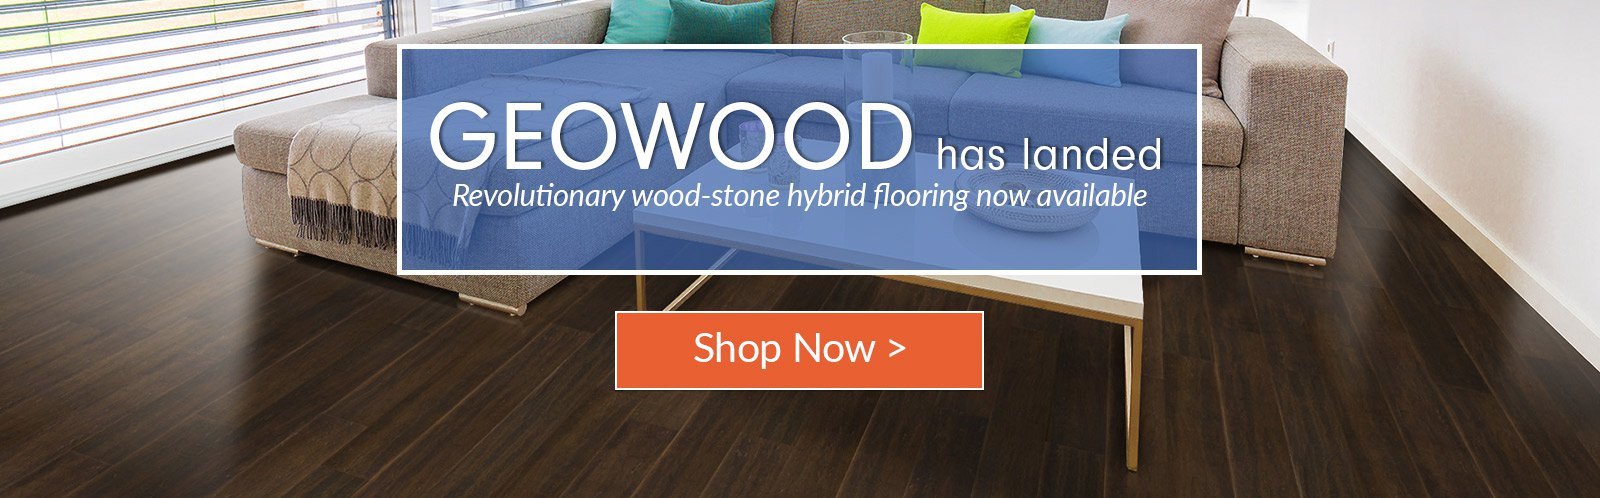 18 Perfect Hardwood Flooring Company Denver 2024 free download hardwood flooring company denver of green building construction materials and home decor cali bamboo pertaining to geowood launch homepage slider